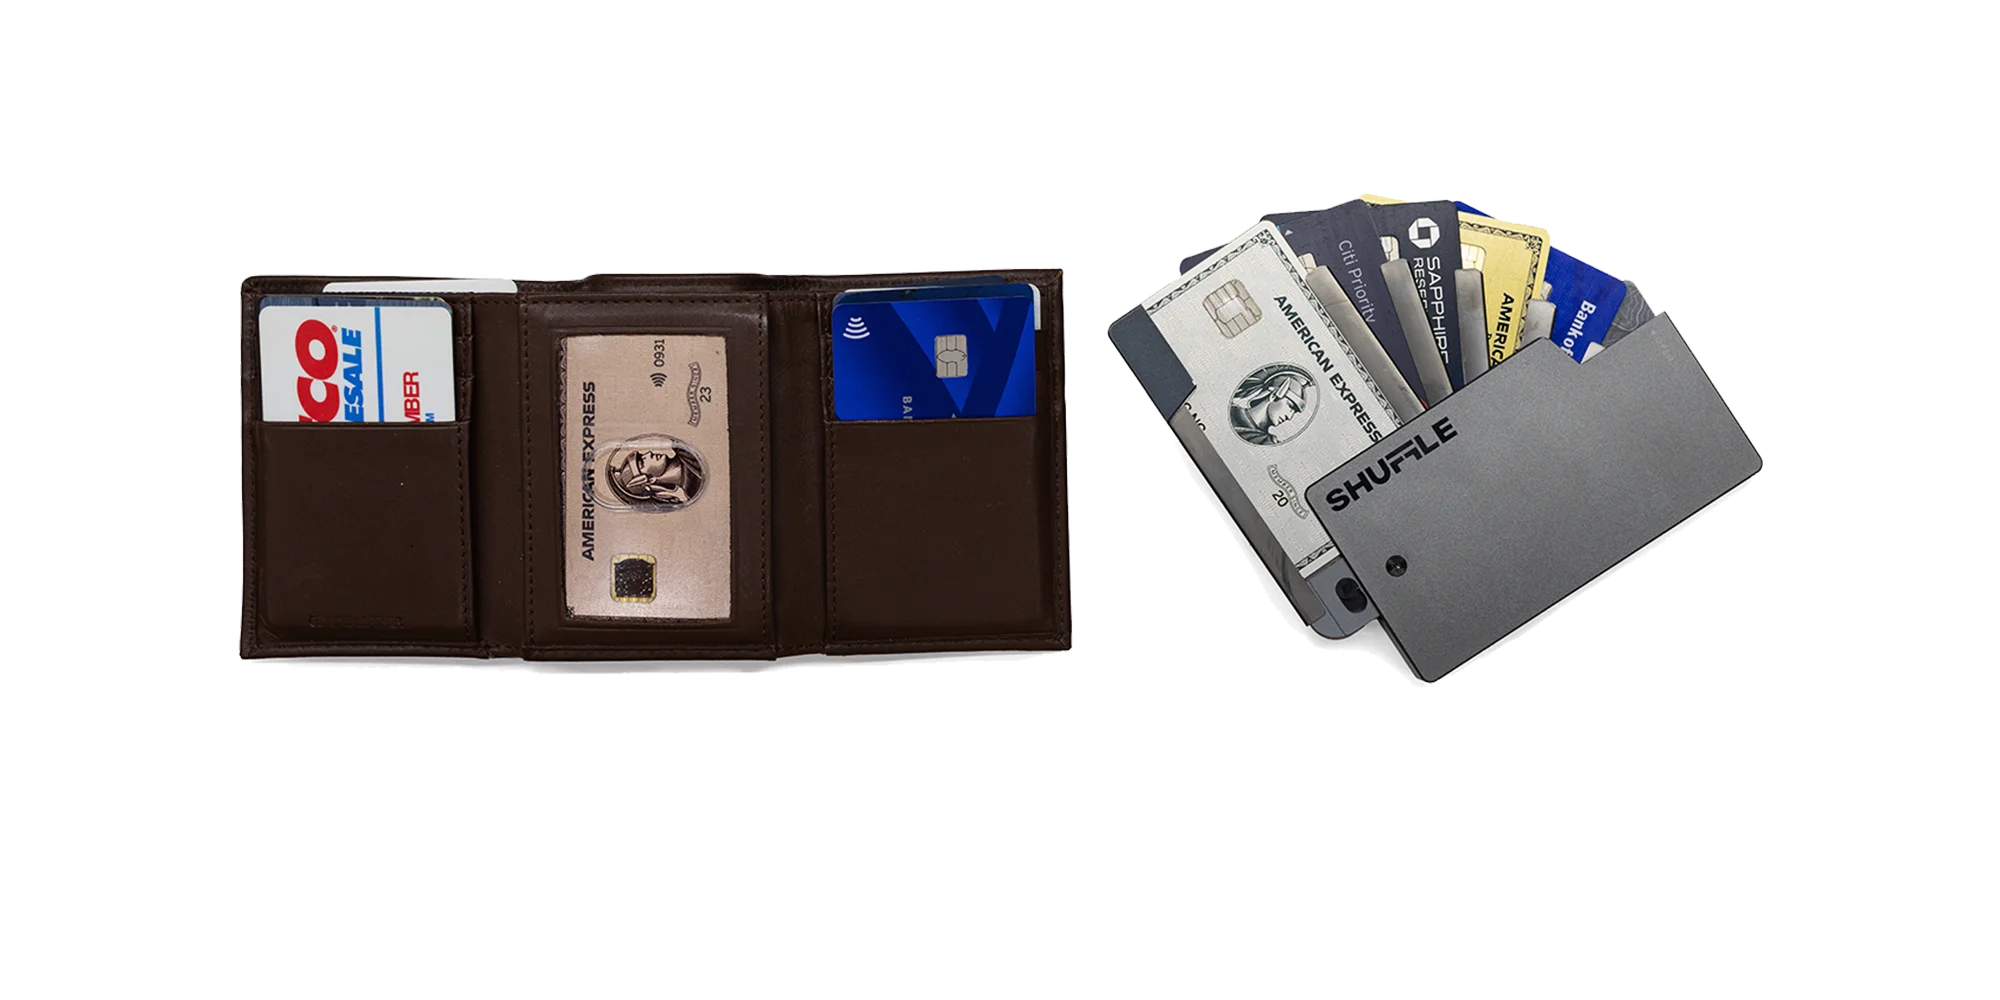 shuffle smart wallet have Innovative deck-of-cards opening mechanism